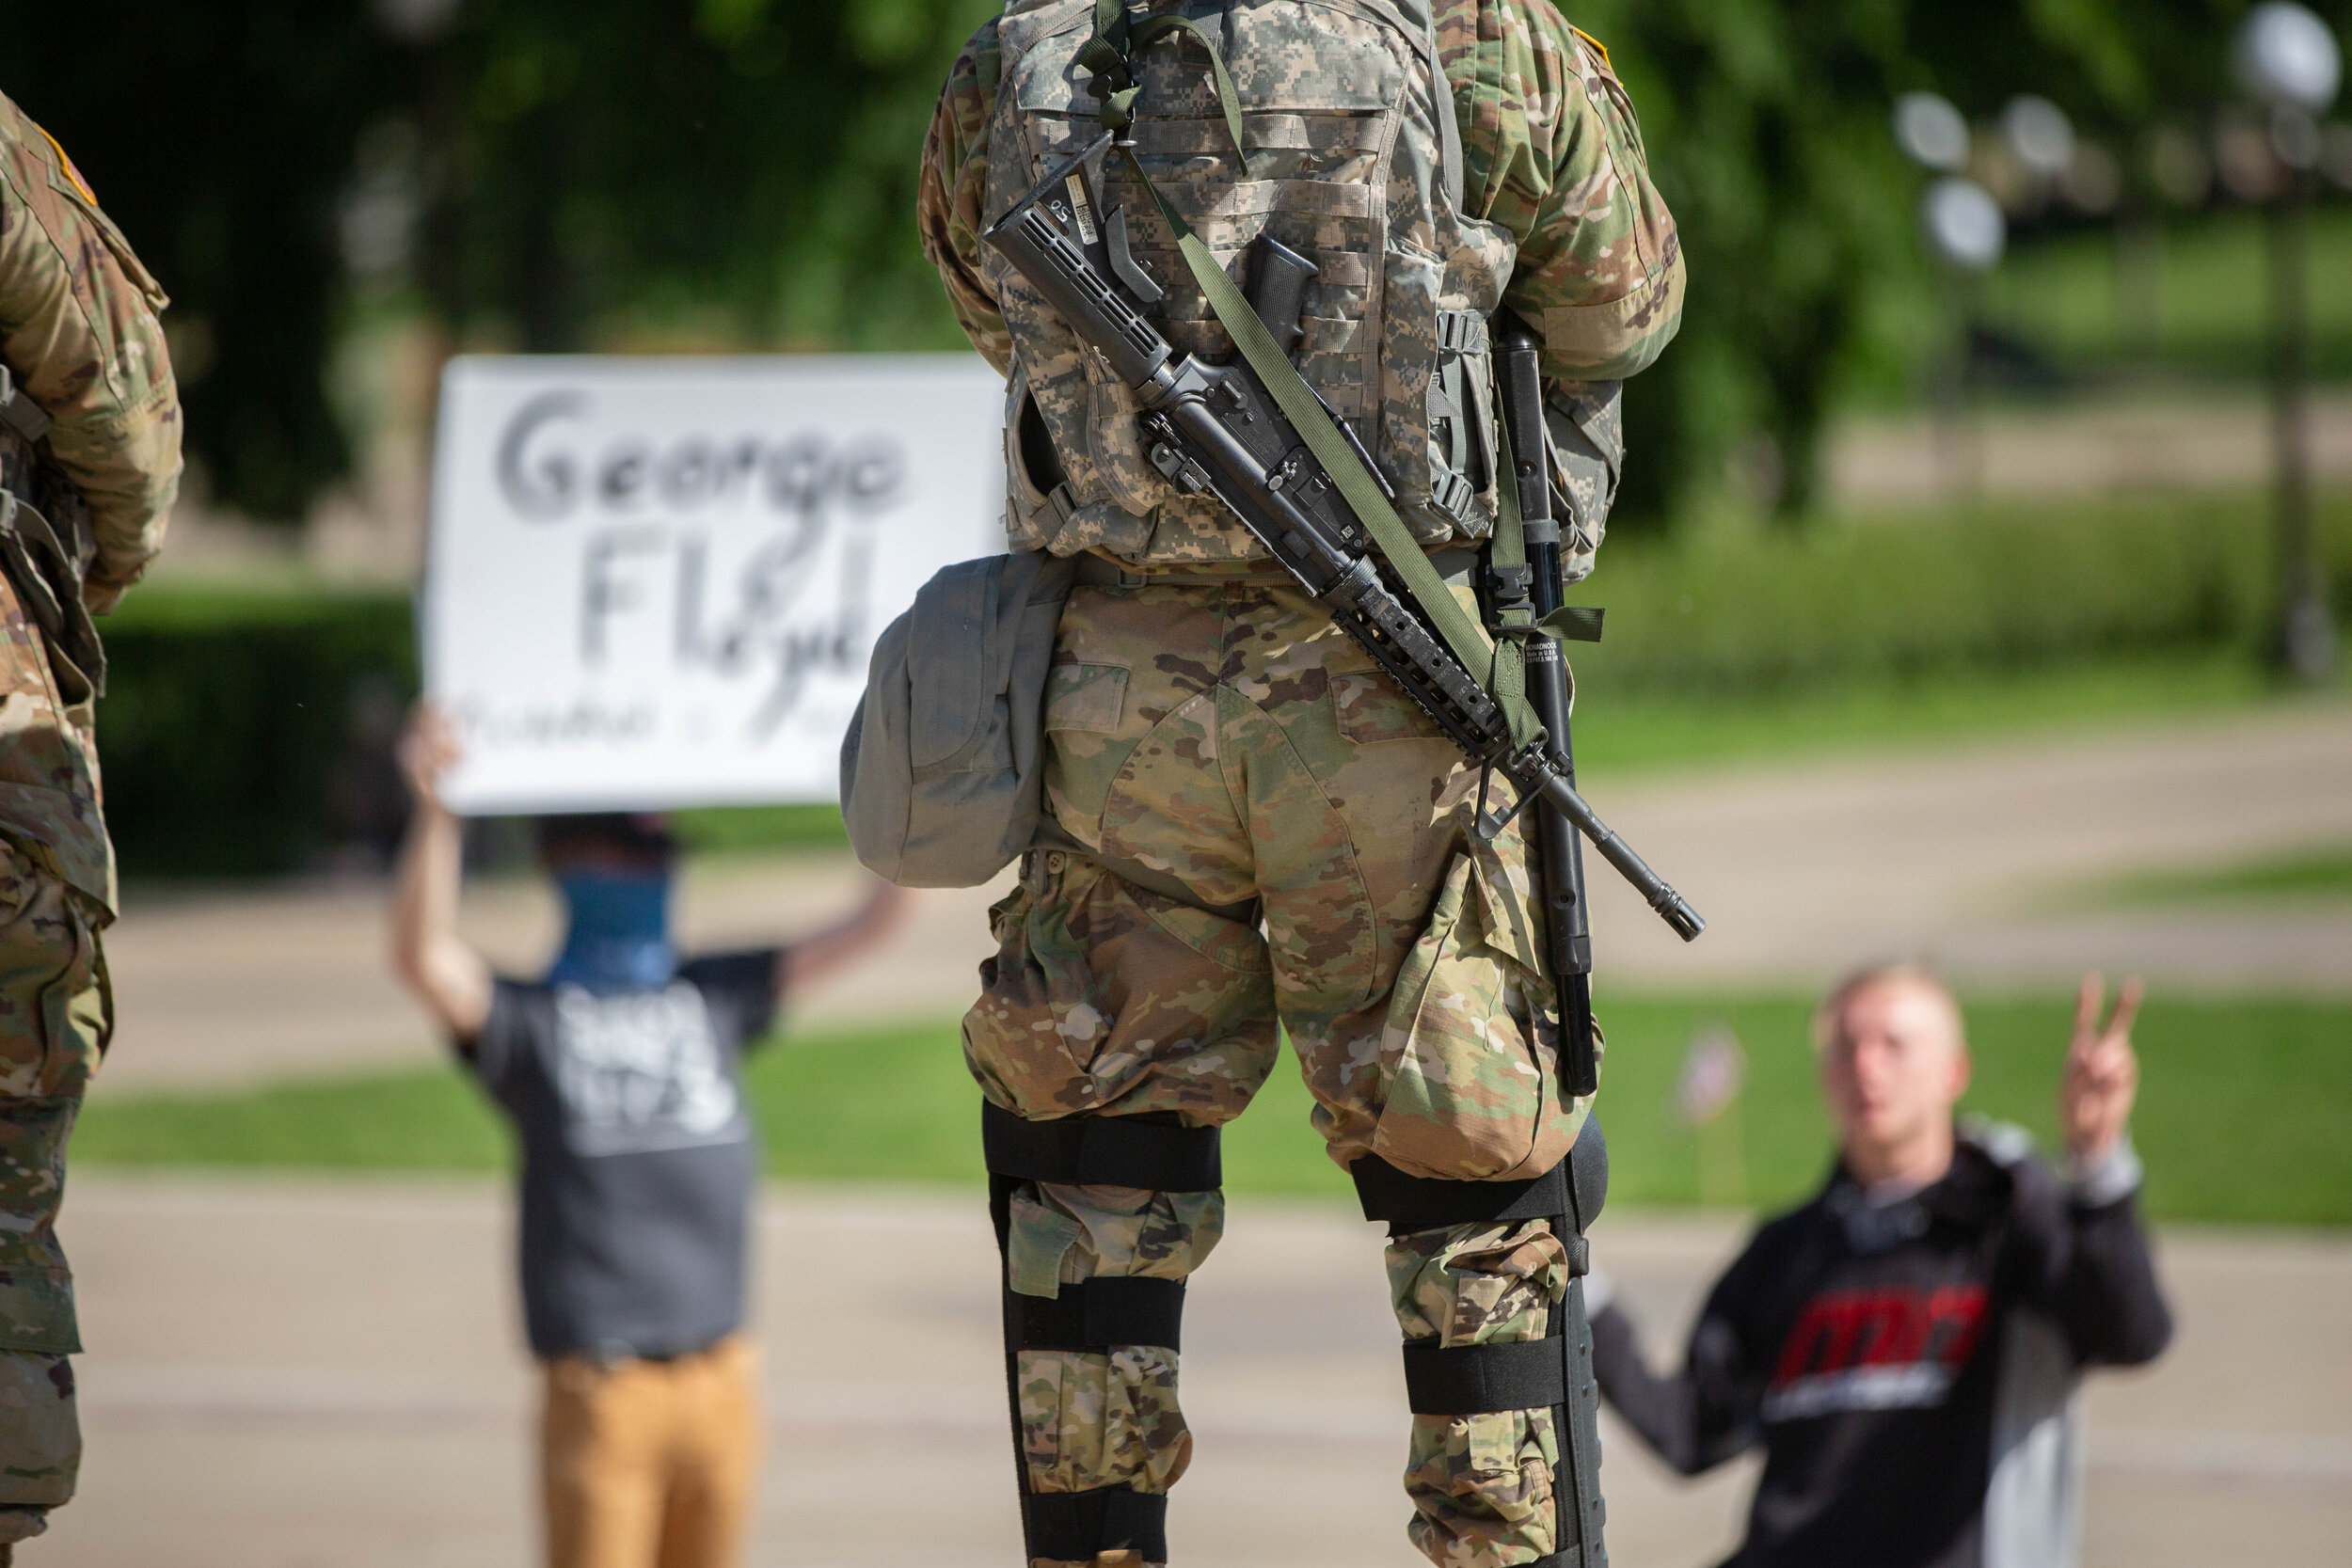  Two men peacefully protest at the bottom of the State Capitol building in Saint Paul, Minnesota. A National Guard soldier sits in front of them with a gun on his back on June 1, 2020. Chris Juhn/Zenger 